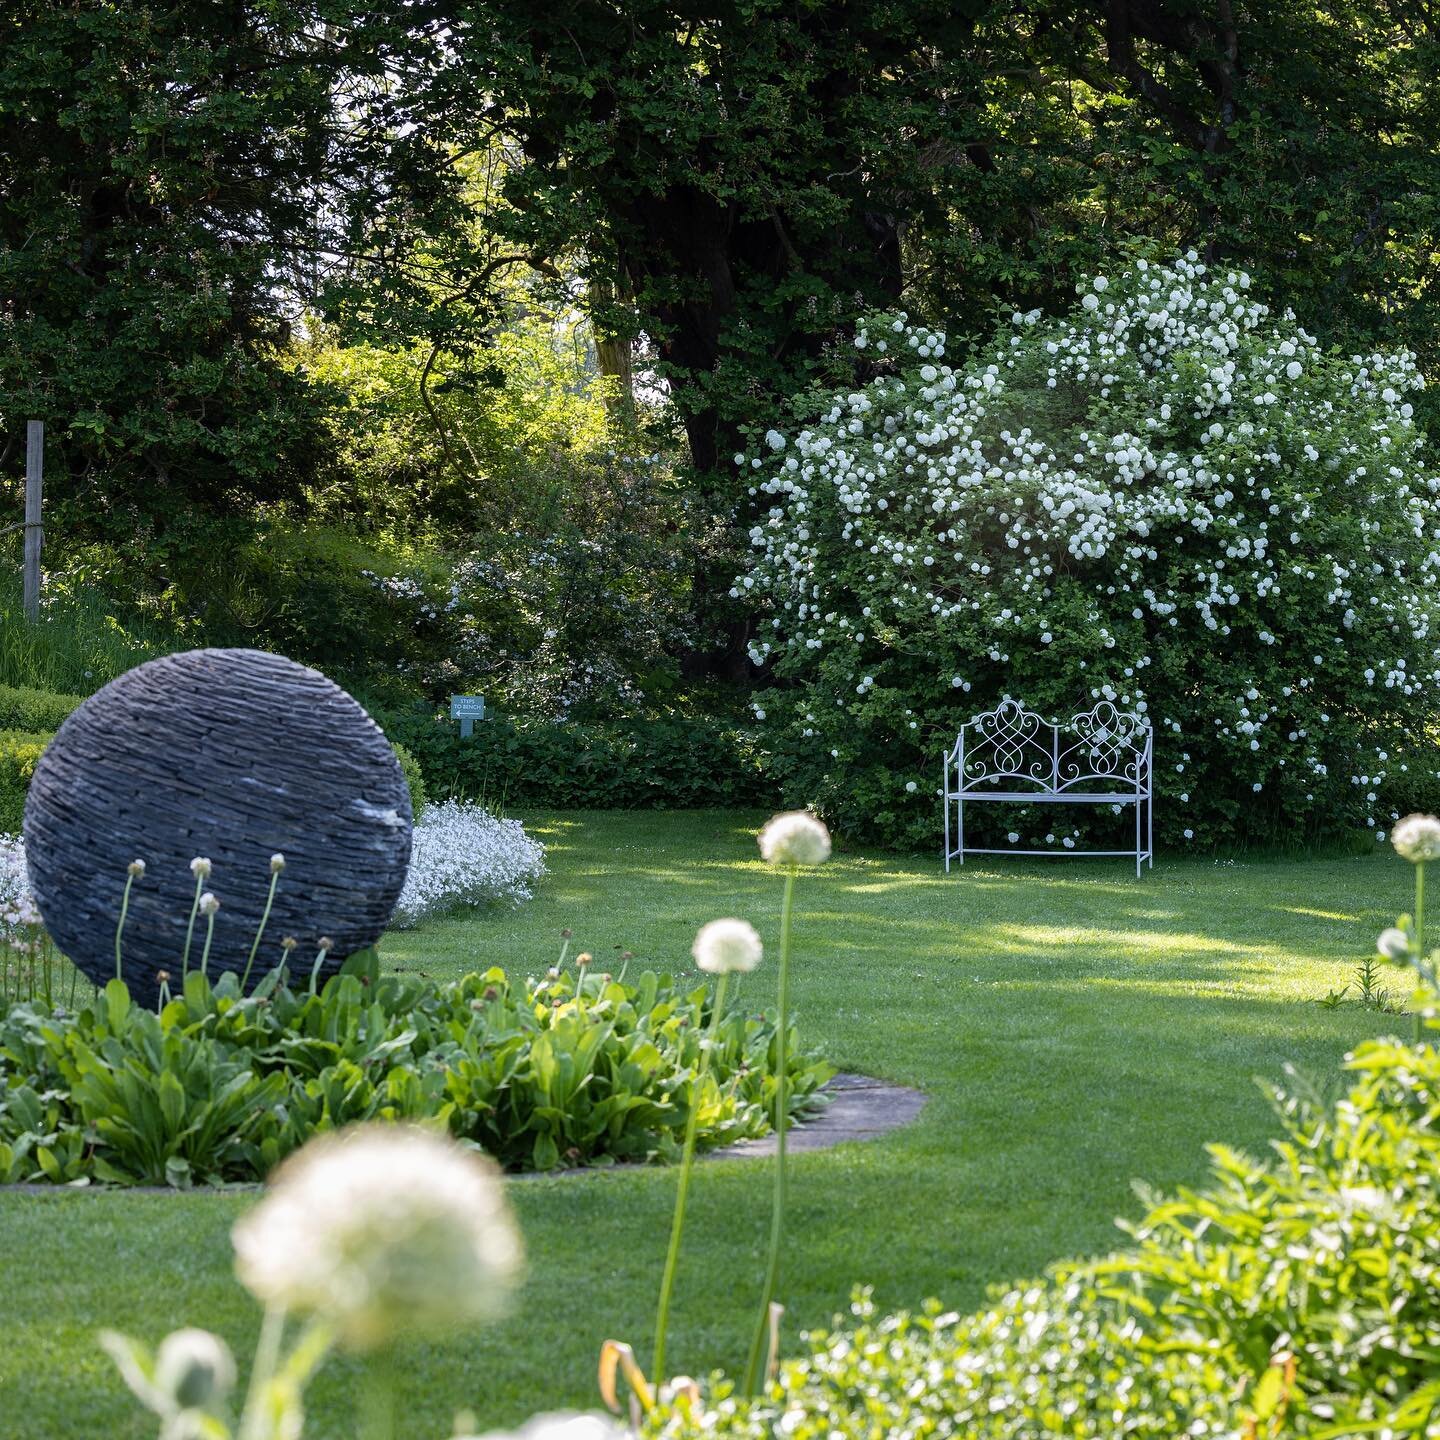 Wake up to the White Space Garden, take time with your morning tea and enjoy the sun dappling through the trees.
All yours when you stay at Easton.